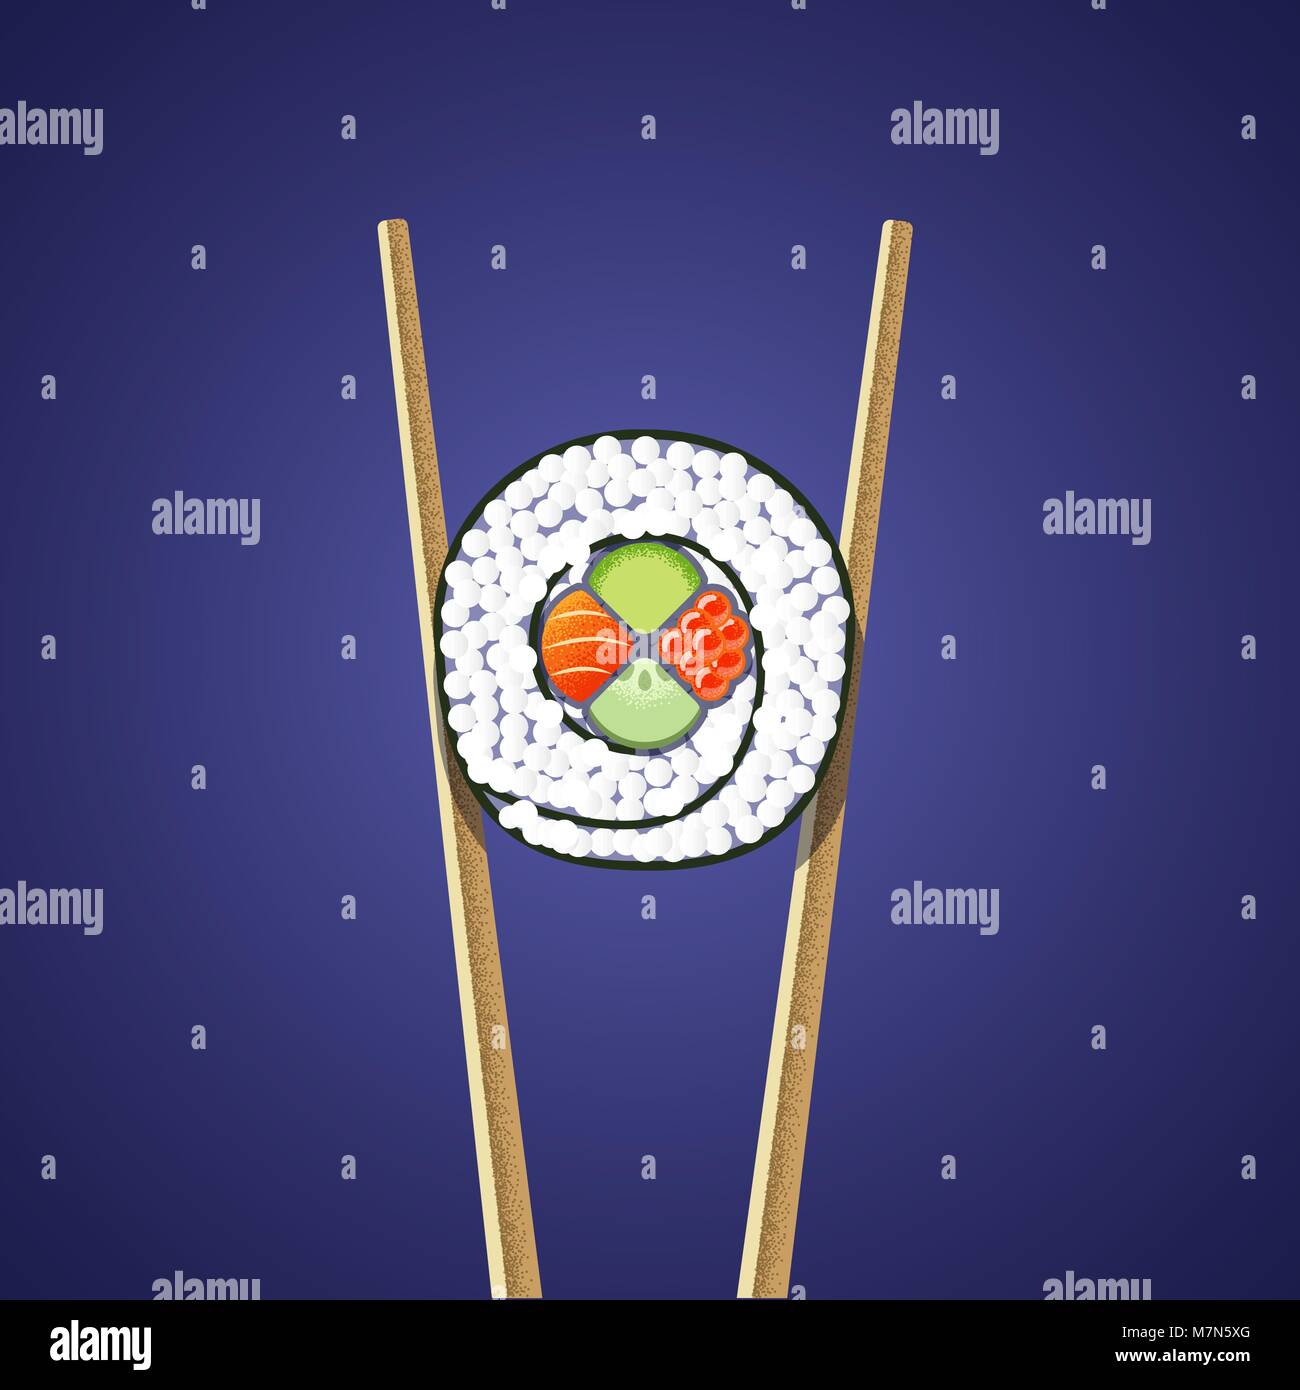 Illustration of sushi roll holding between two chopsticks on the dark background. Flat and textures. Stock Vector